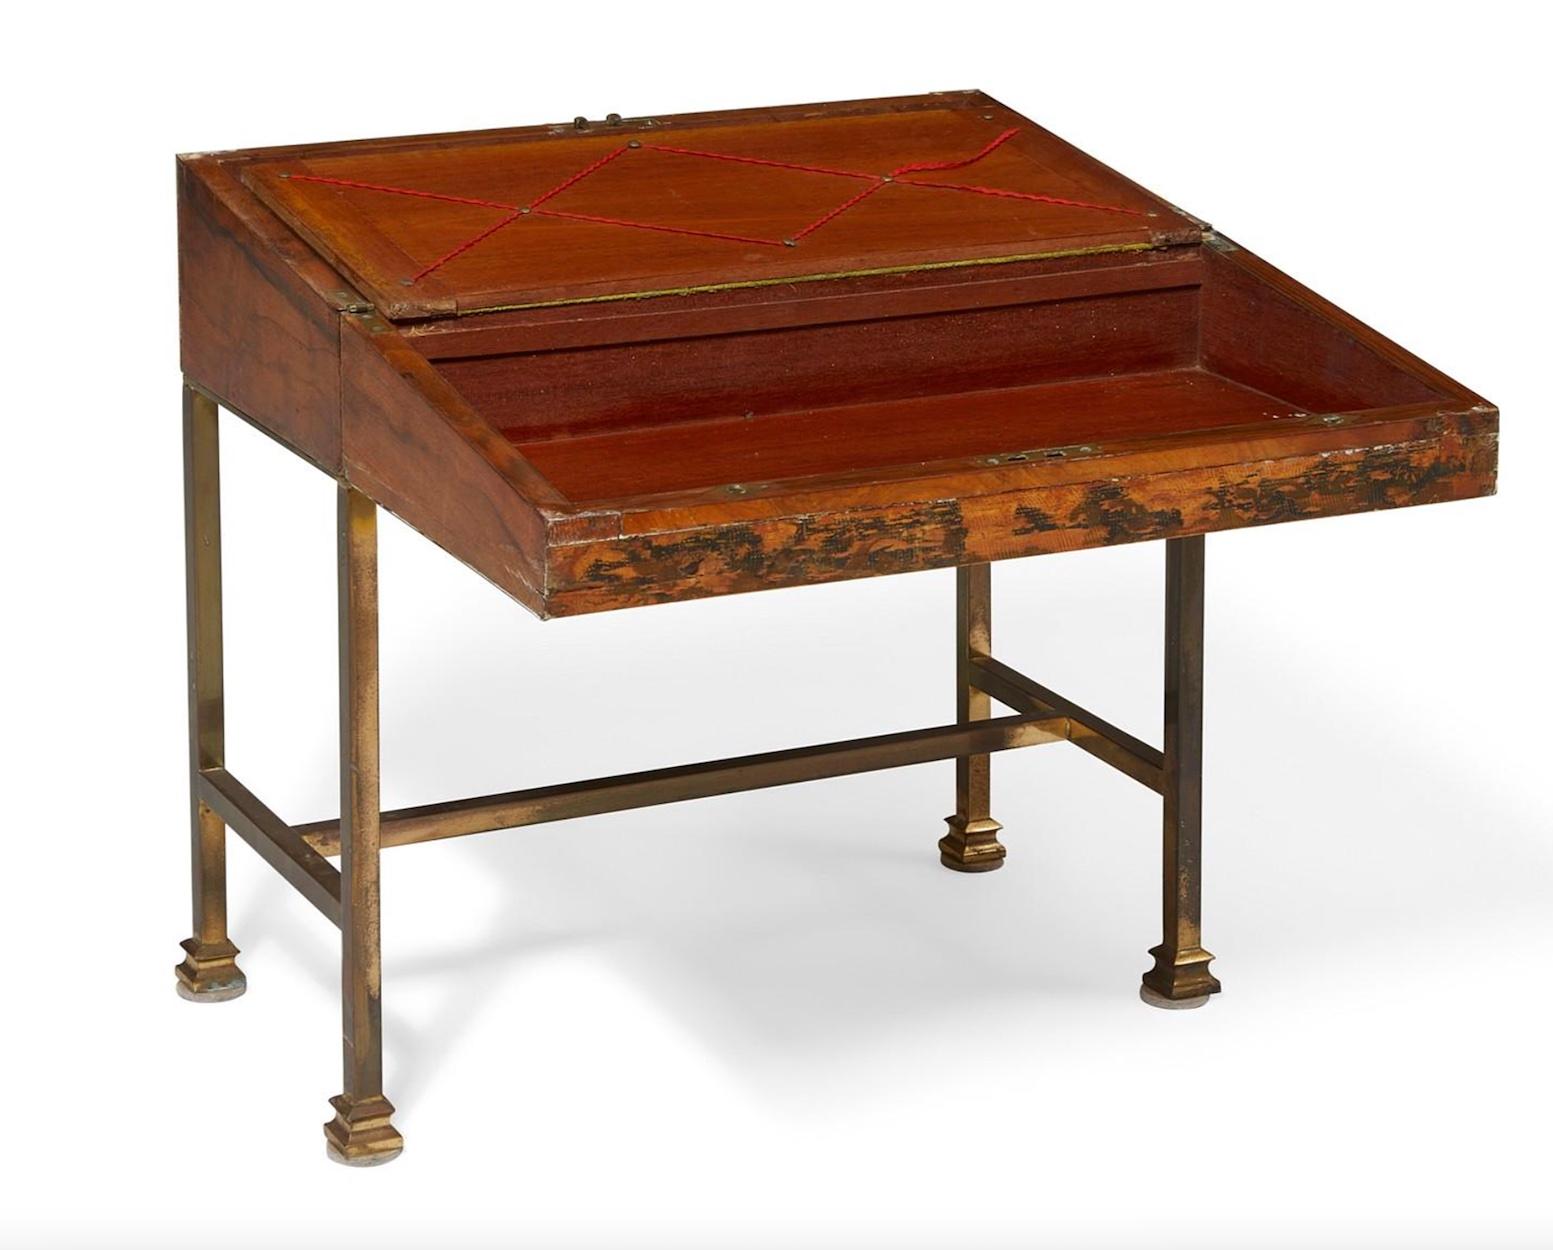 19th Century English Walnut Lap Desk In Good Condition For Sale In Salt Lake City, UT